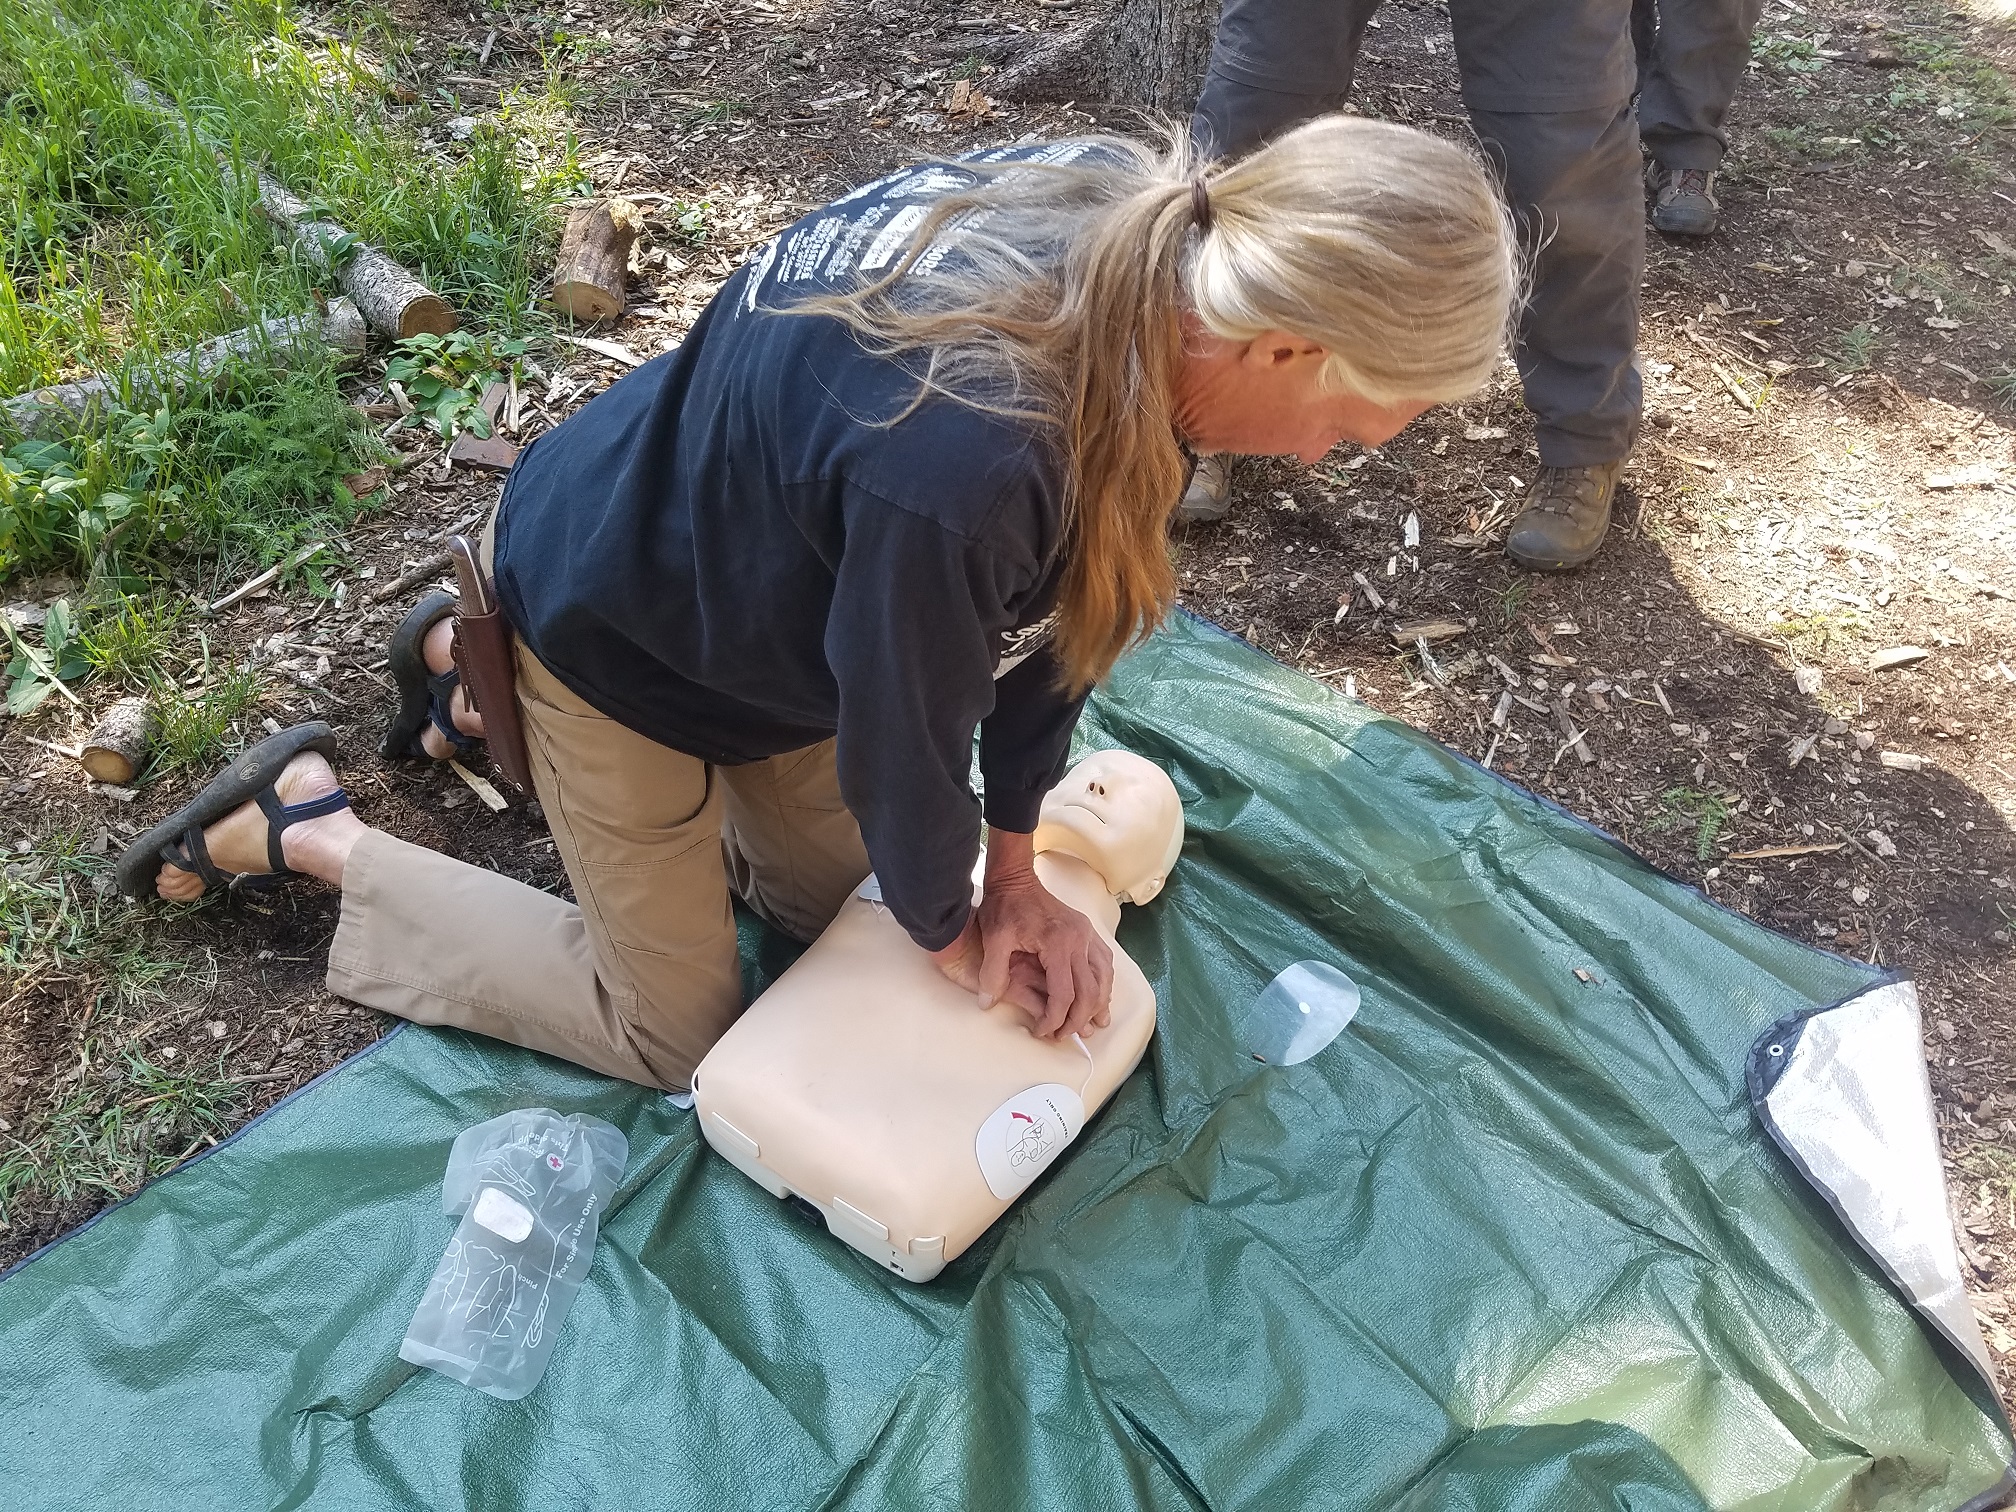 Why should I take a Wilderness First Aid or Wilderness First Responder Class?